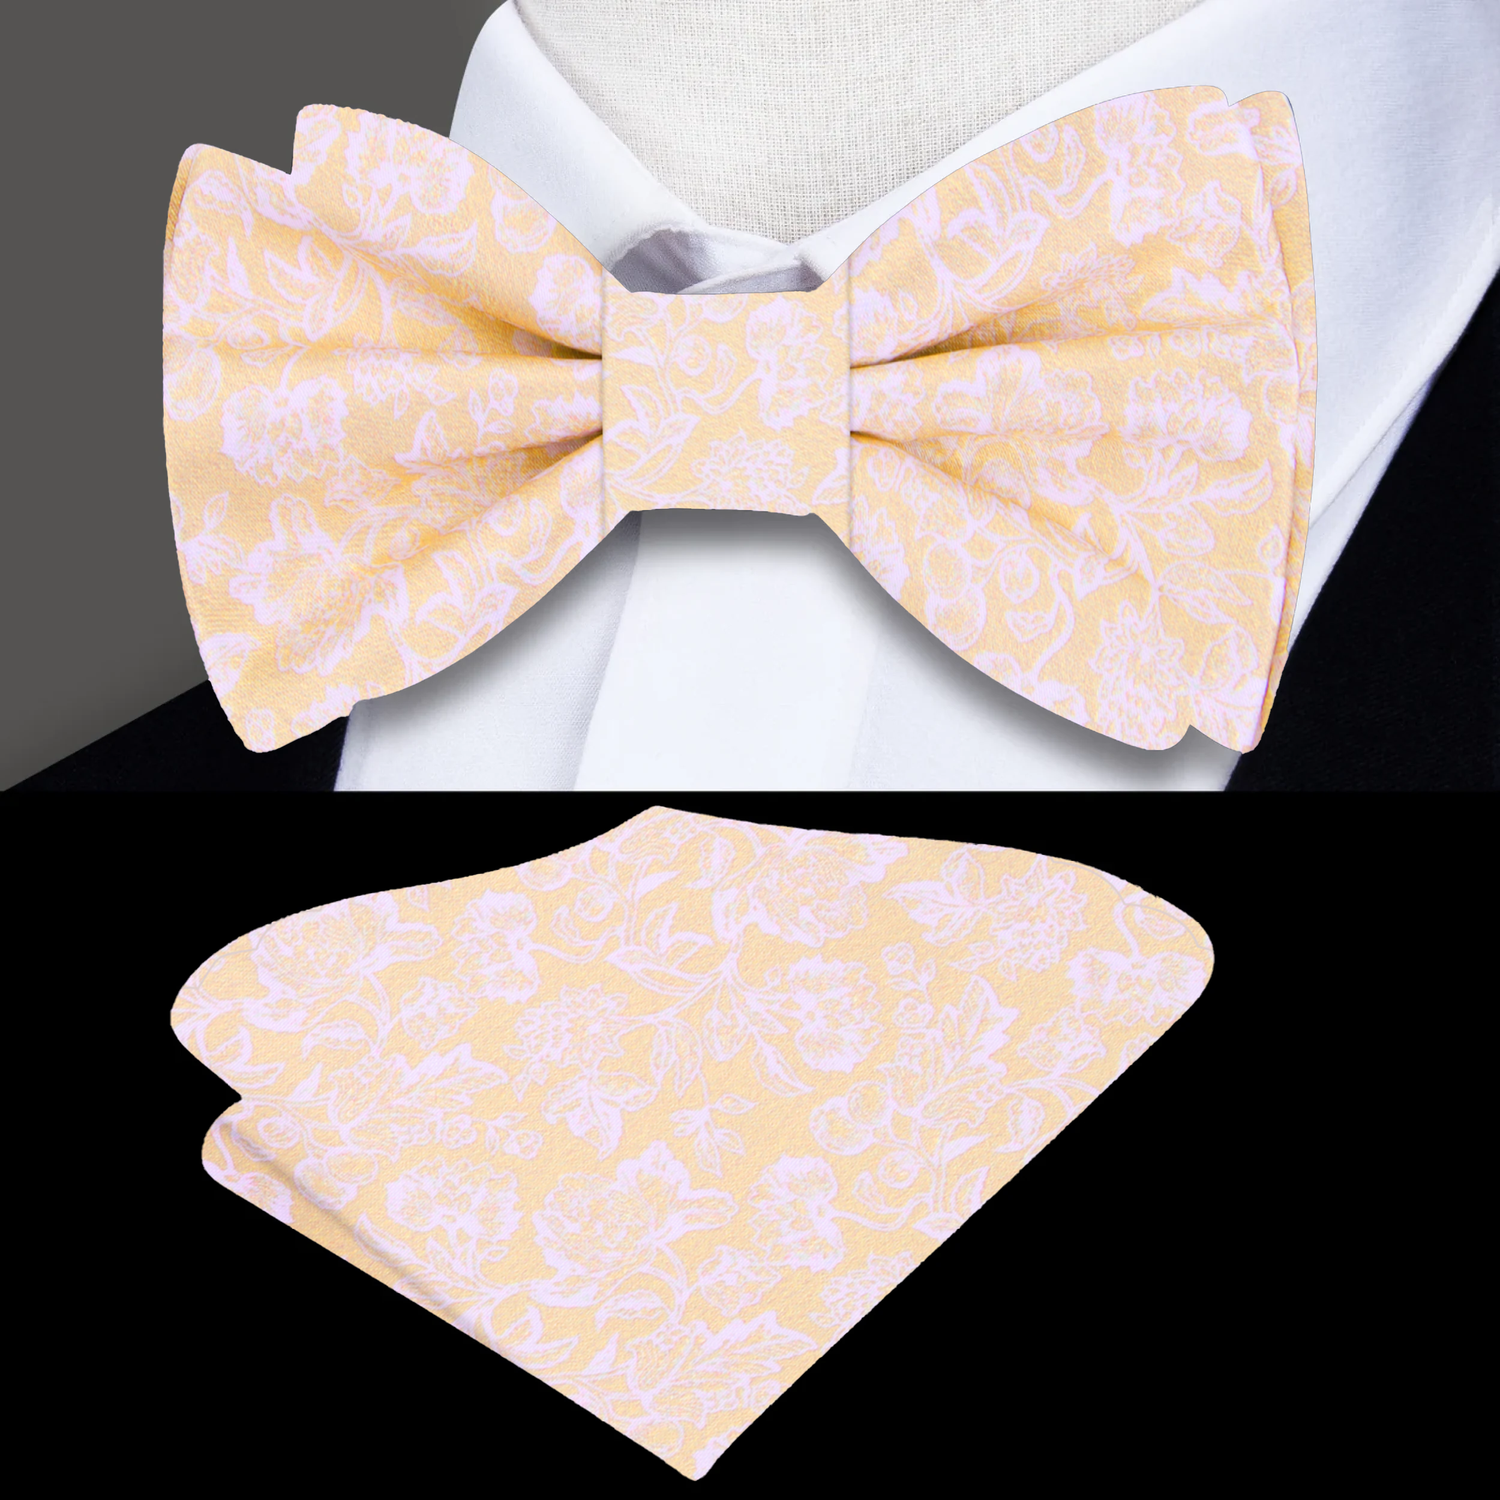 Light Brown Filigree Floral Bow Tie and Pocket Square||Light Brown